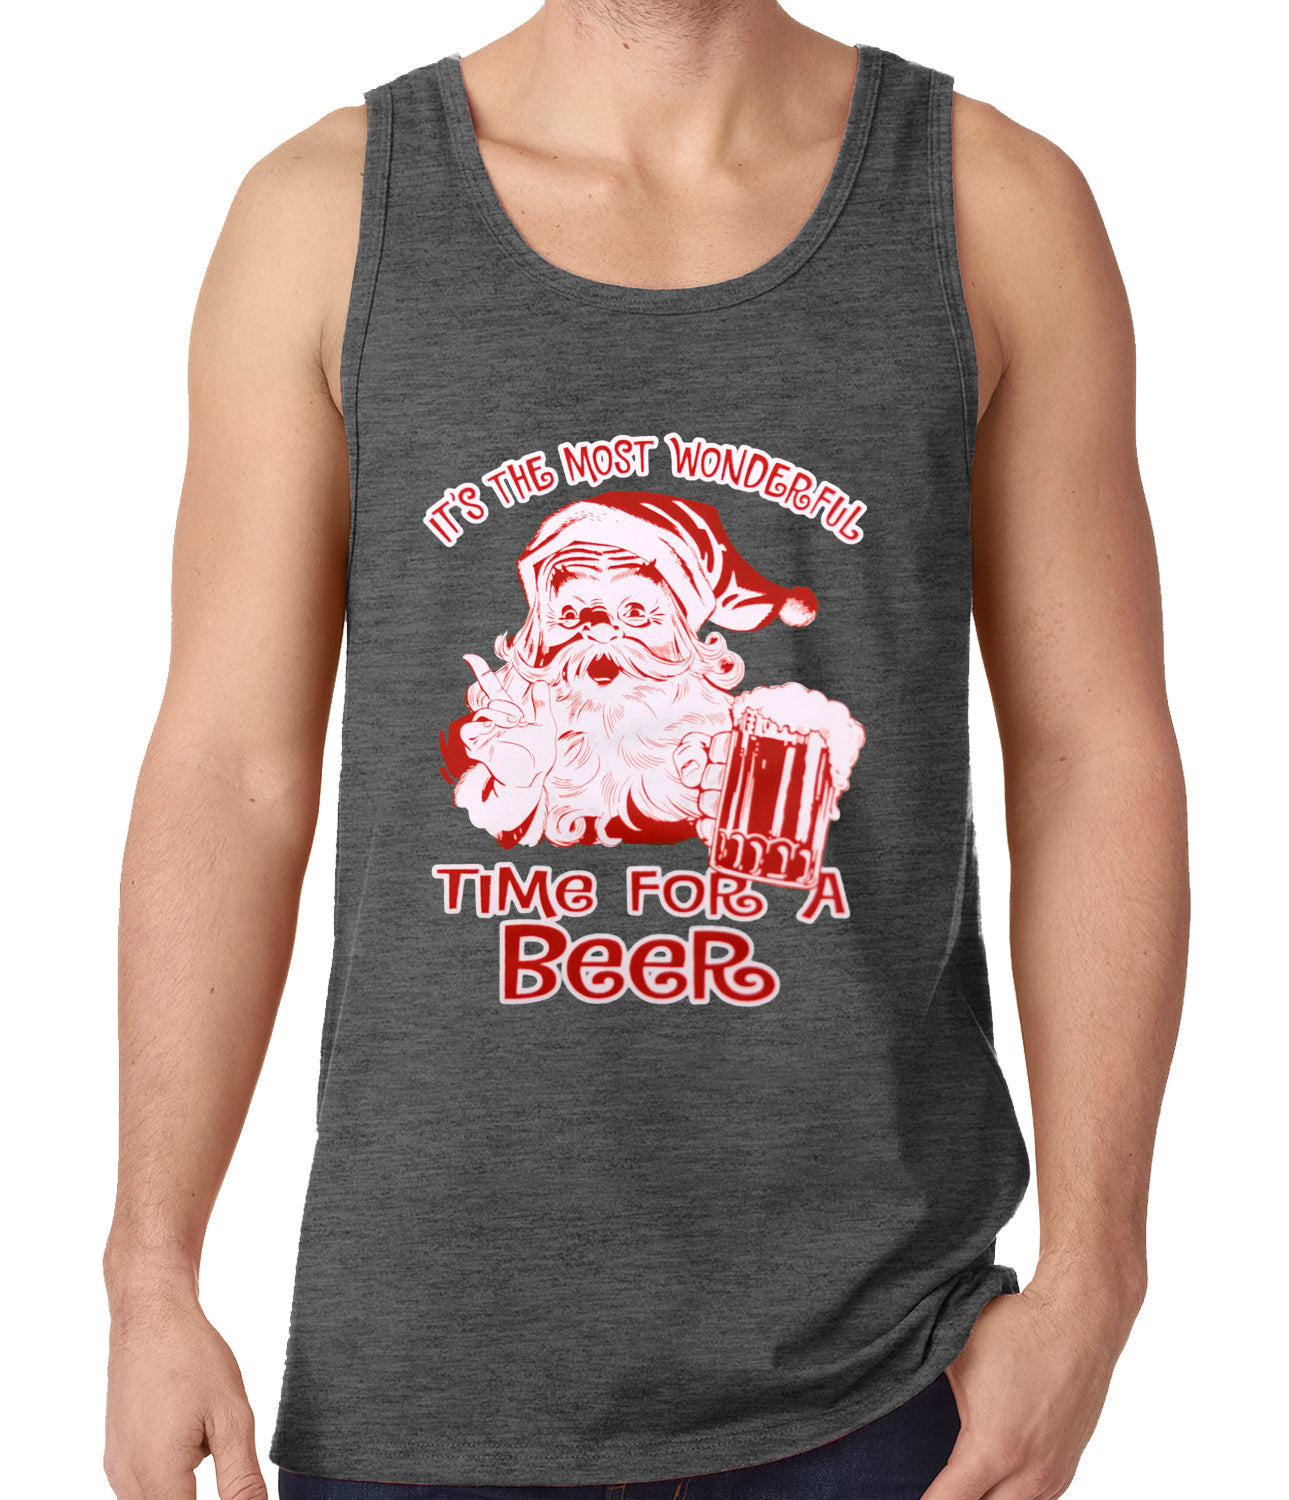 It's The Most Wonderful Time for a Beer Funny Christmas Tank Top